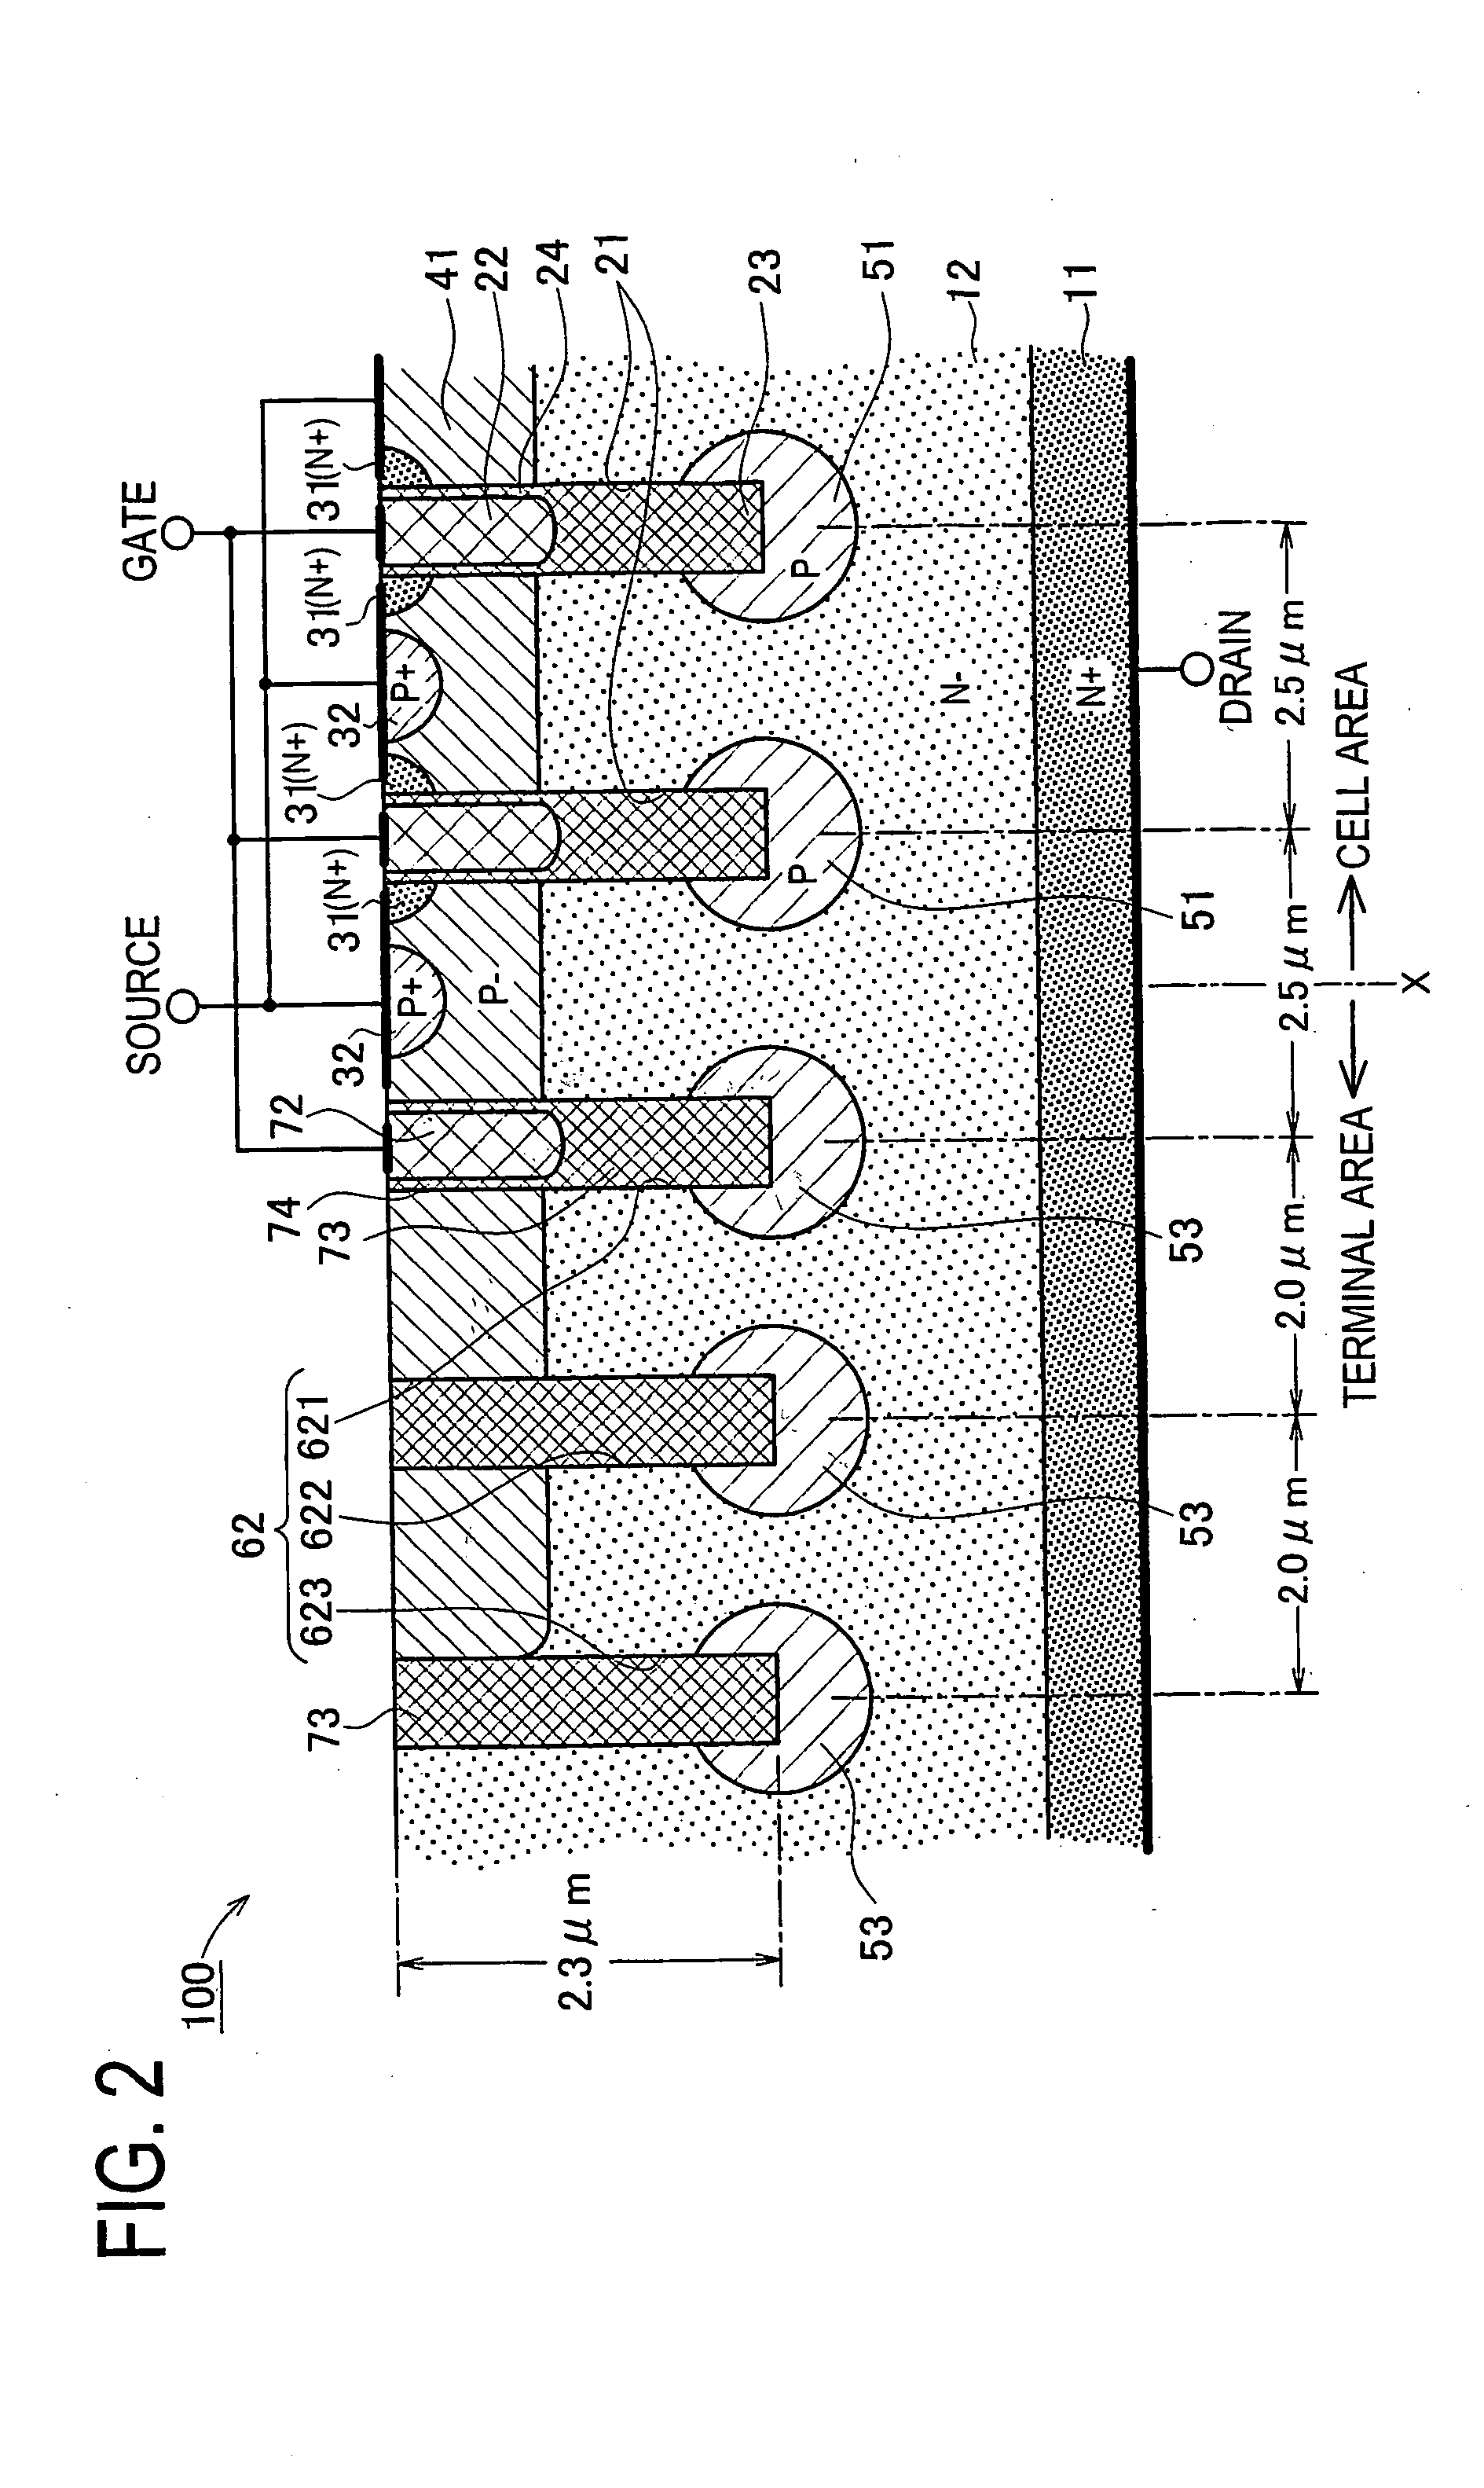 Insulated Gate Semiconductor Device and Method for Producing the Same